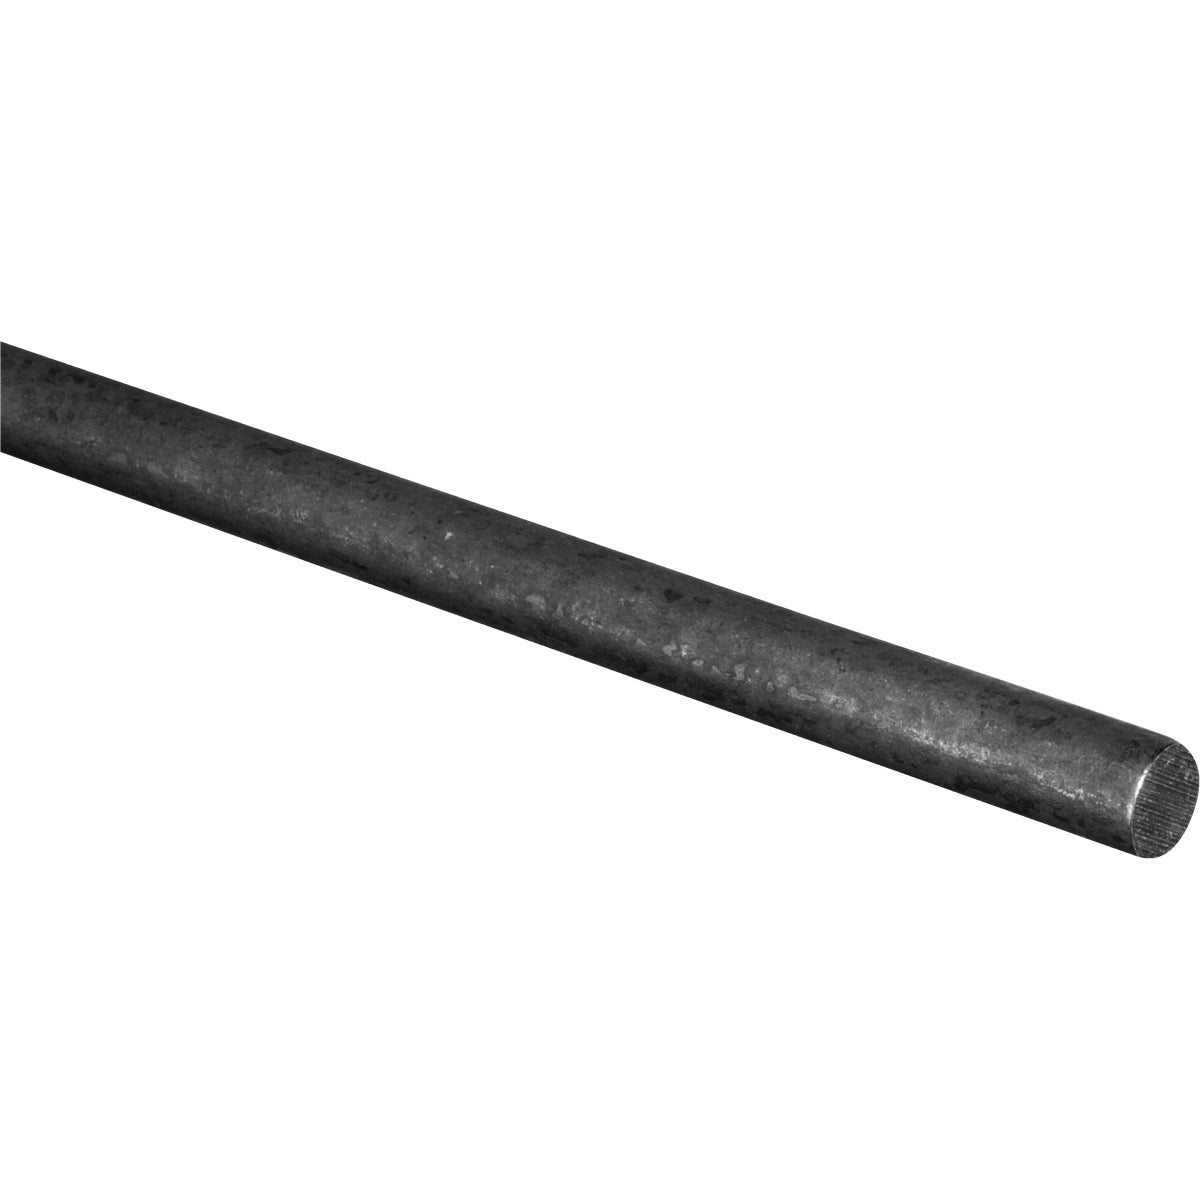 Item 733385, Solid round rods are traditionally used for axles, tent pegs, plant stakes 